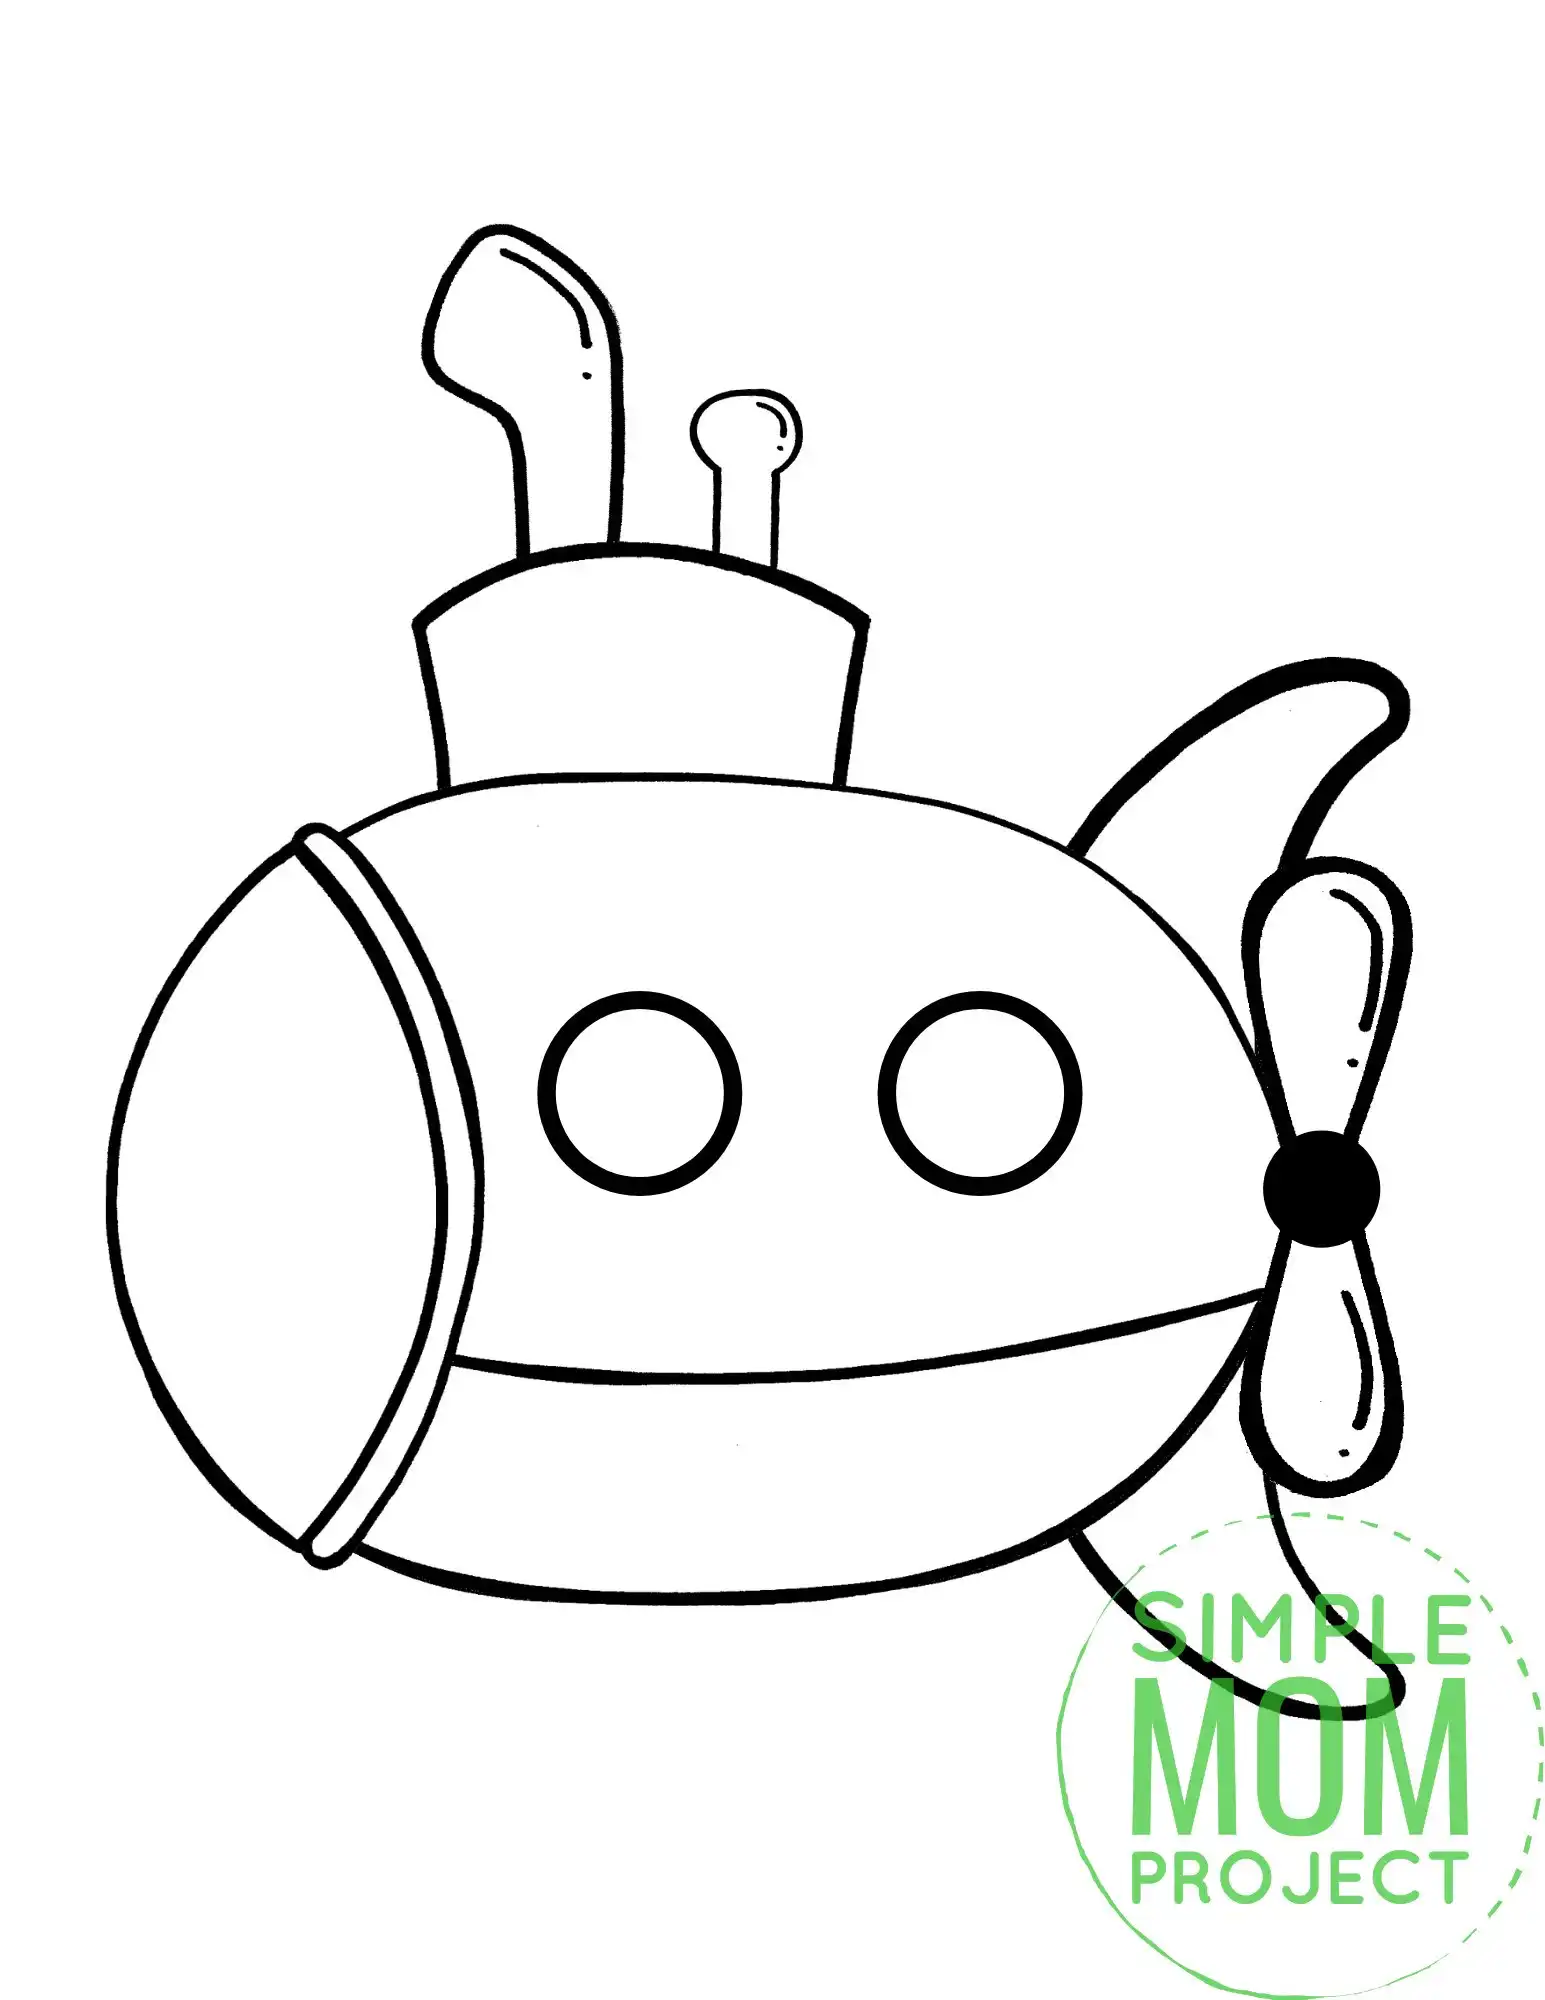 Free printable submarine coloring page â simple mom project